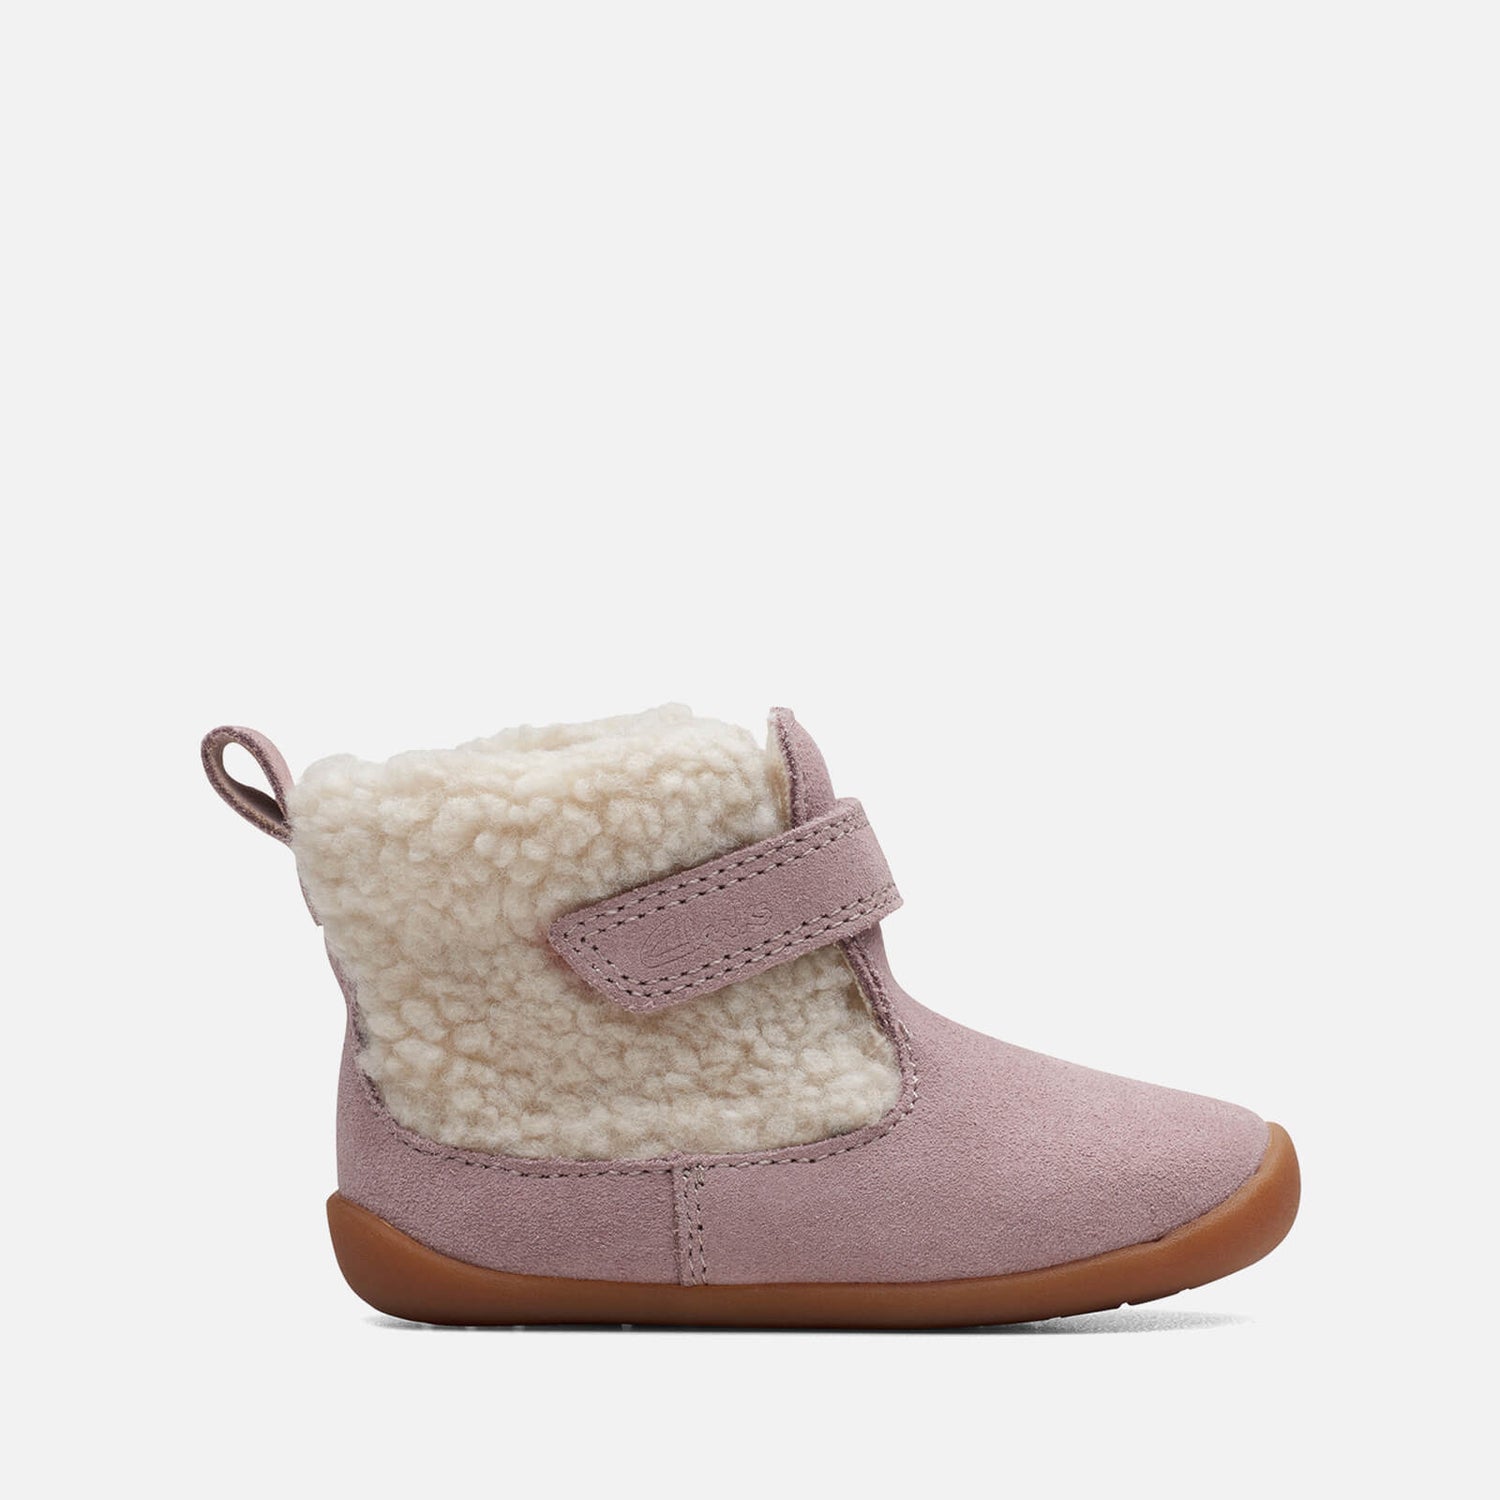 Clarks Toddlers Roamer Moon Suede and Faux Fur Boots - UK 2 Baby